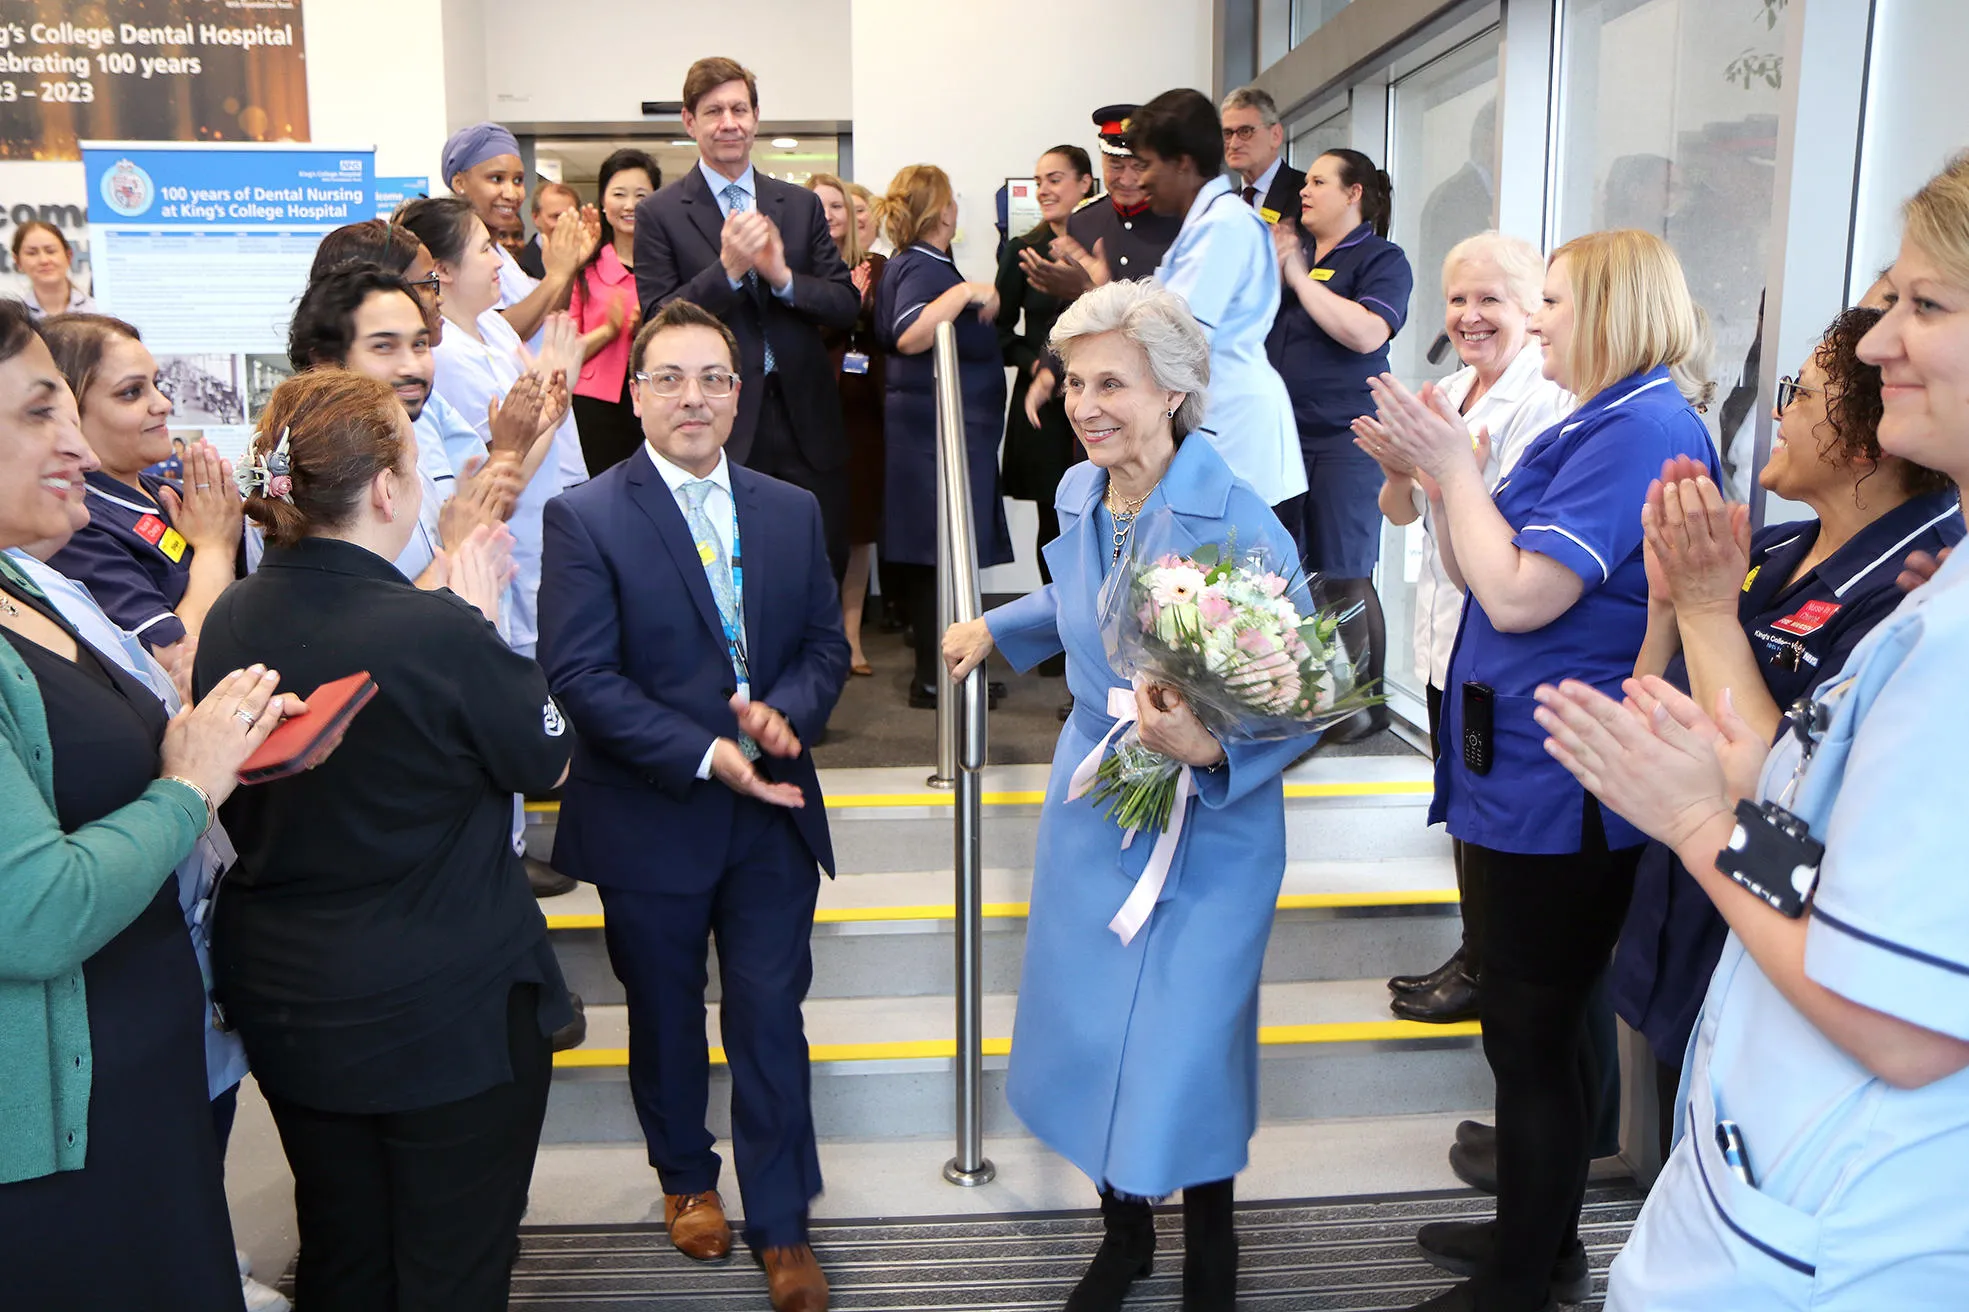 RH The Duchess of Gloucester visited King’s College Hospital 